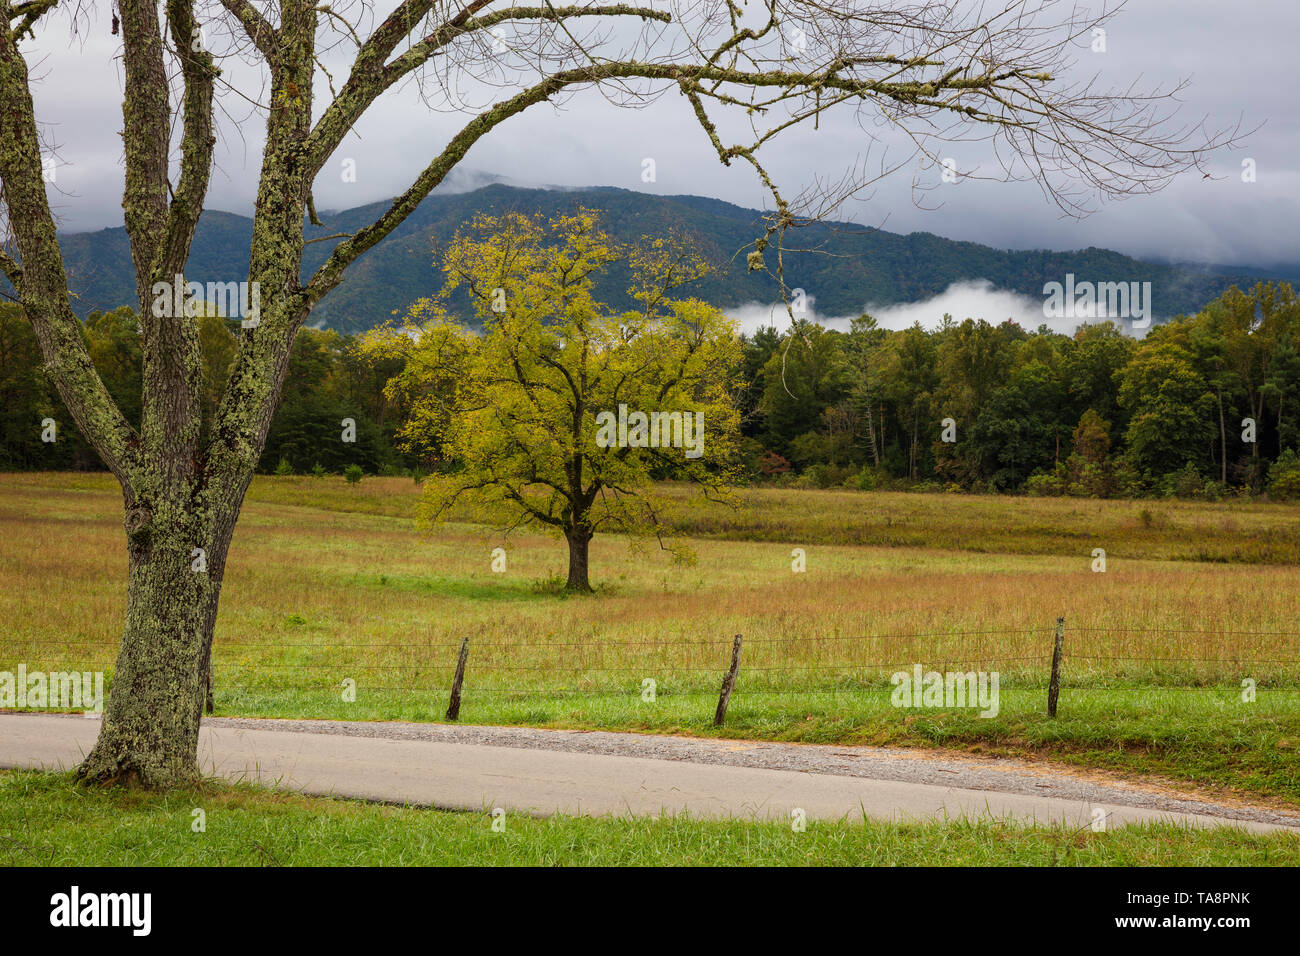 Lichen covered tree and meadow, Cades Cove, Great Smoky Mountains National Park, Tennessee Stock Photo